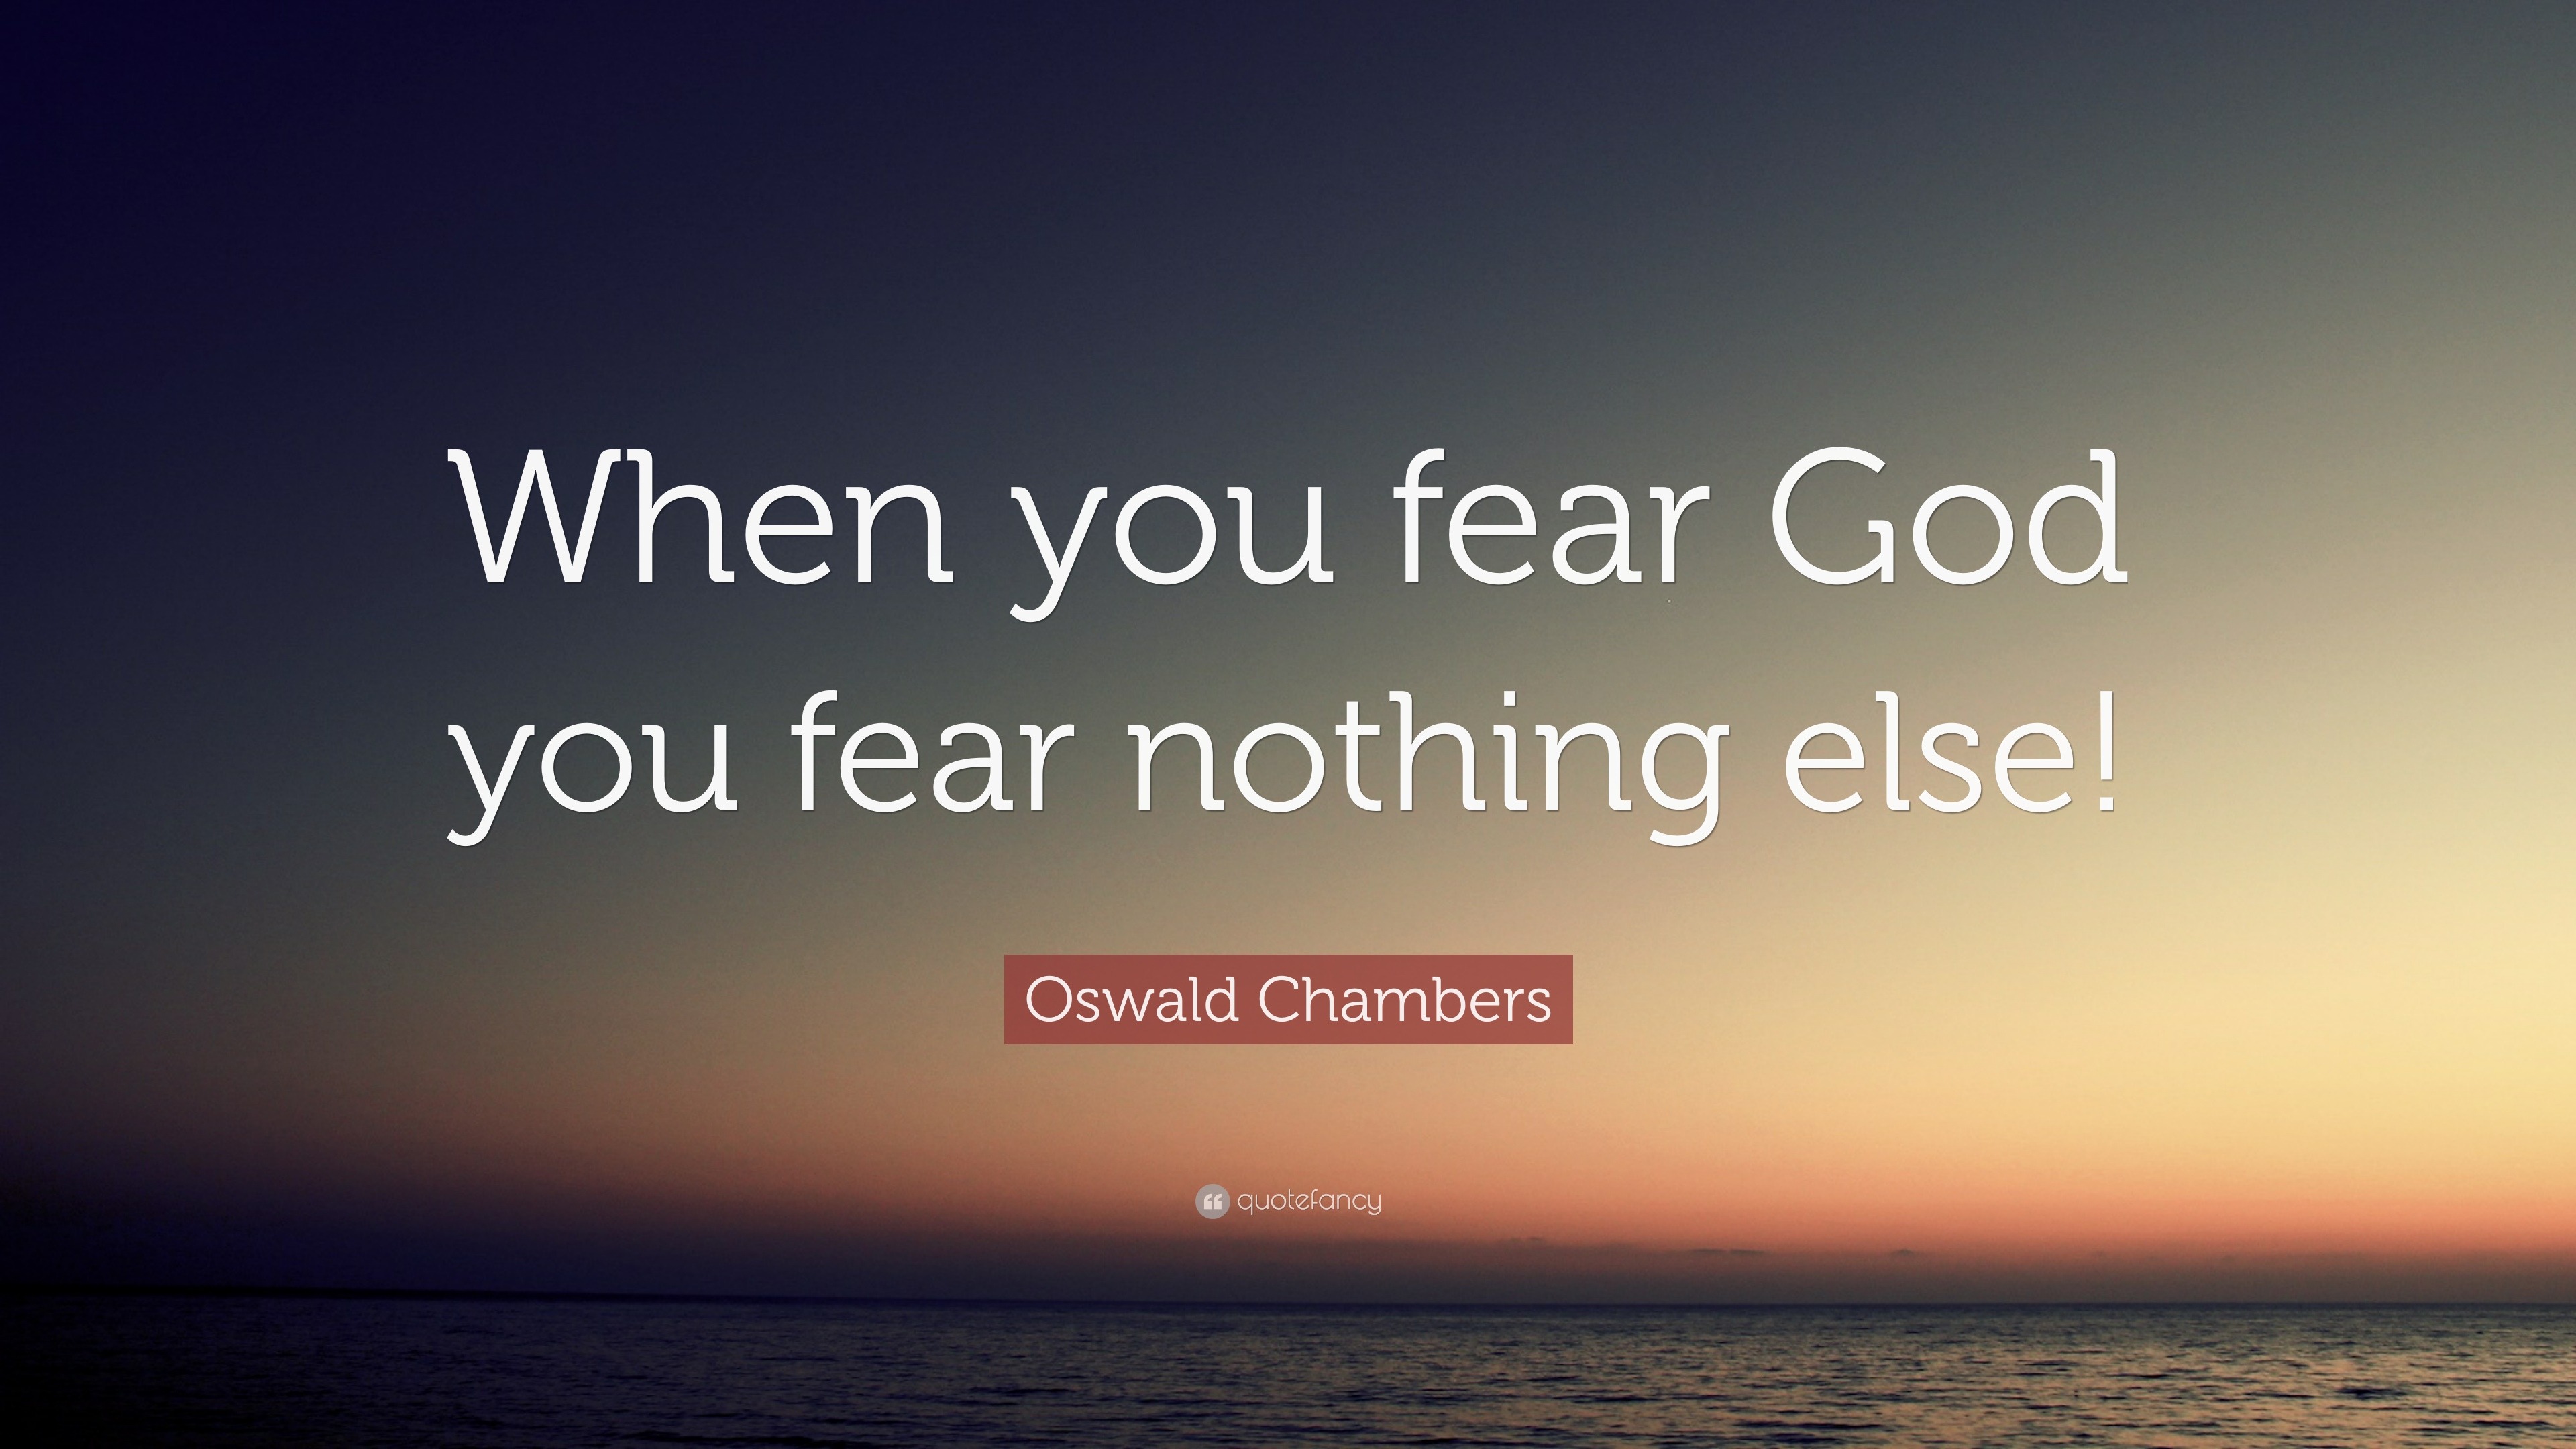 oswald chambers quotes on fear